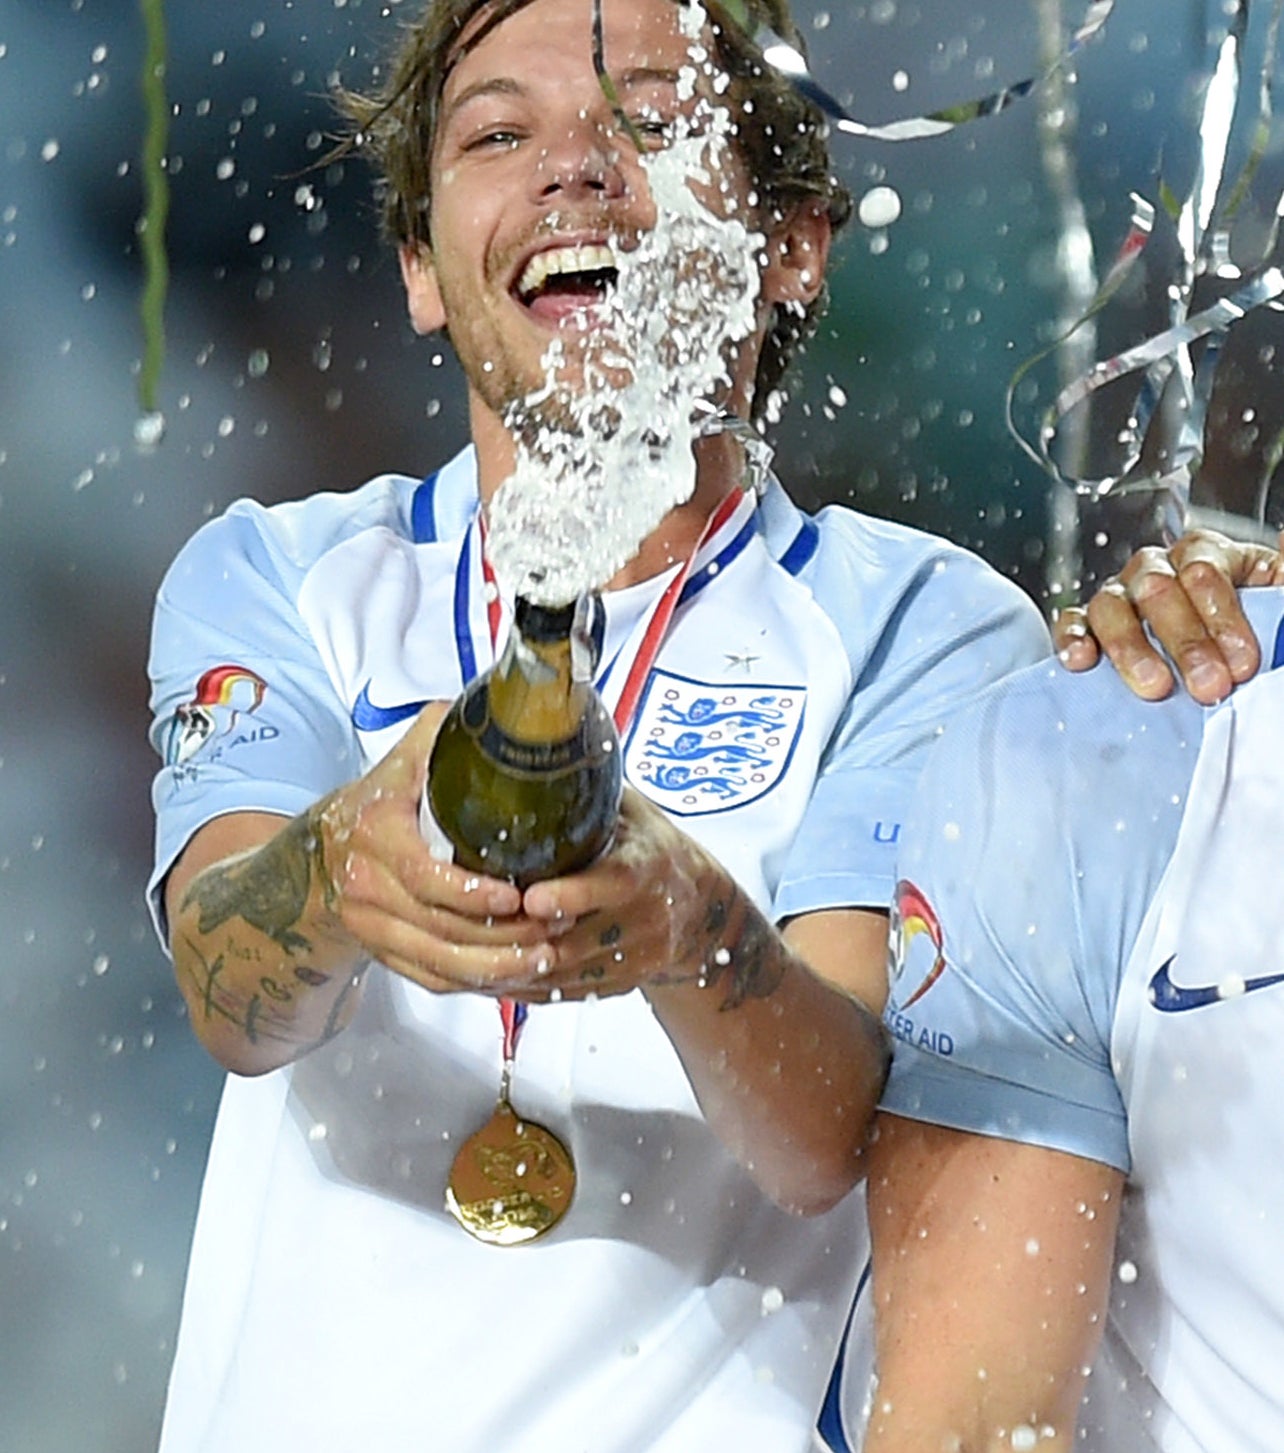 Louis Tomlinson celebratory sprays champagne while wearing a jersey and medal at a sports event